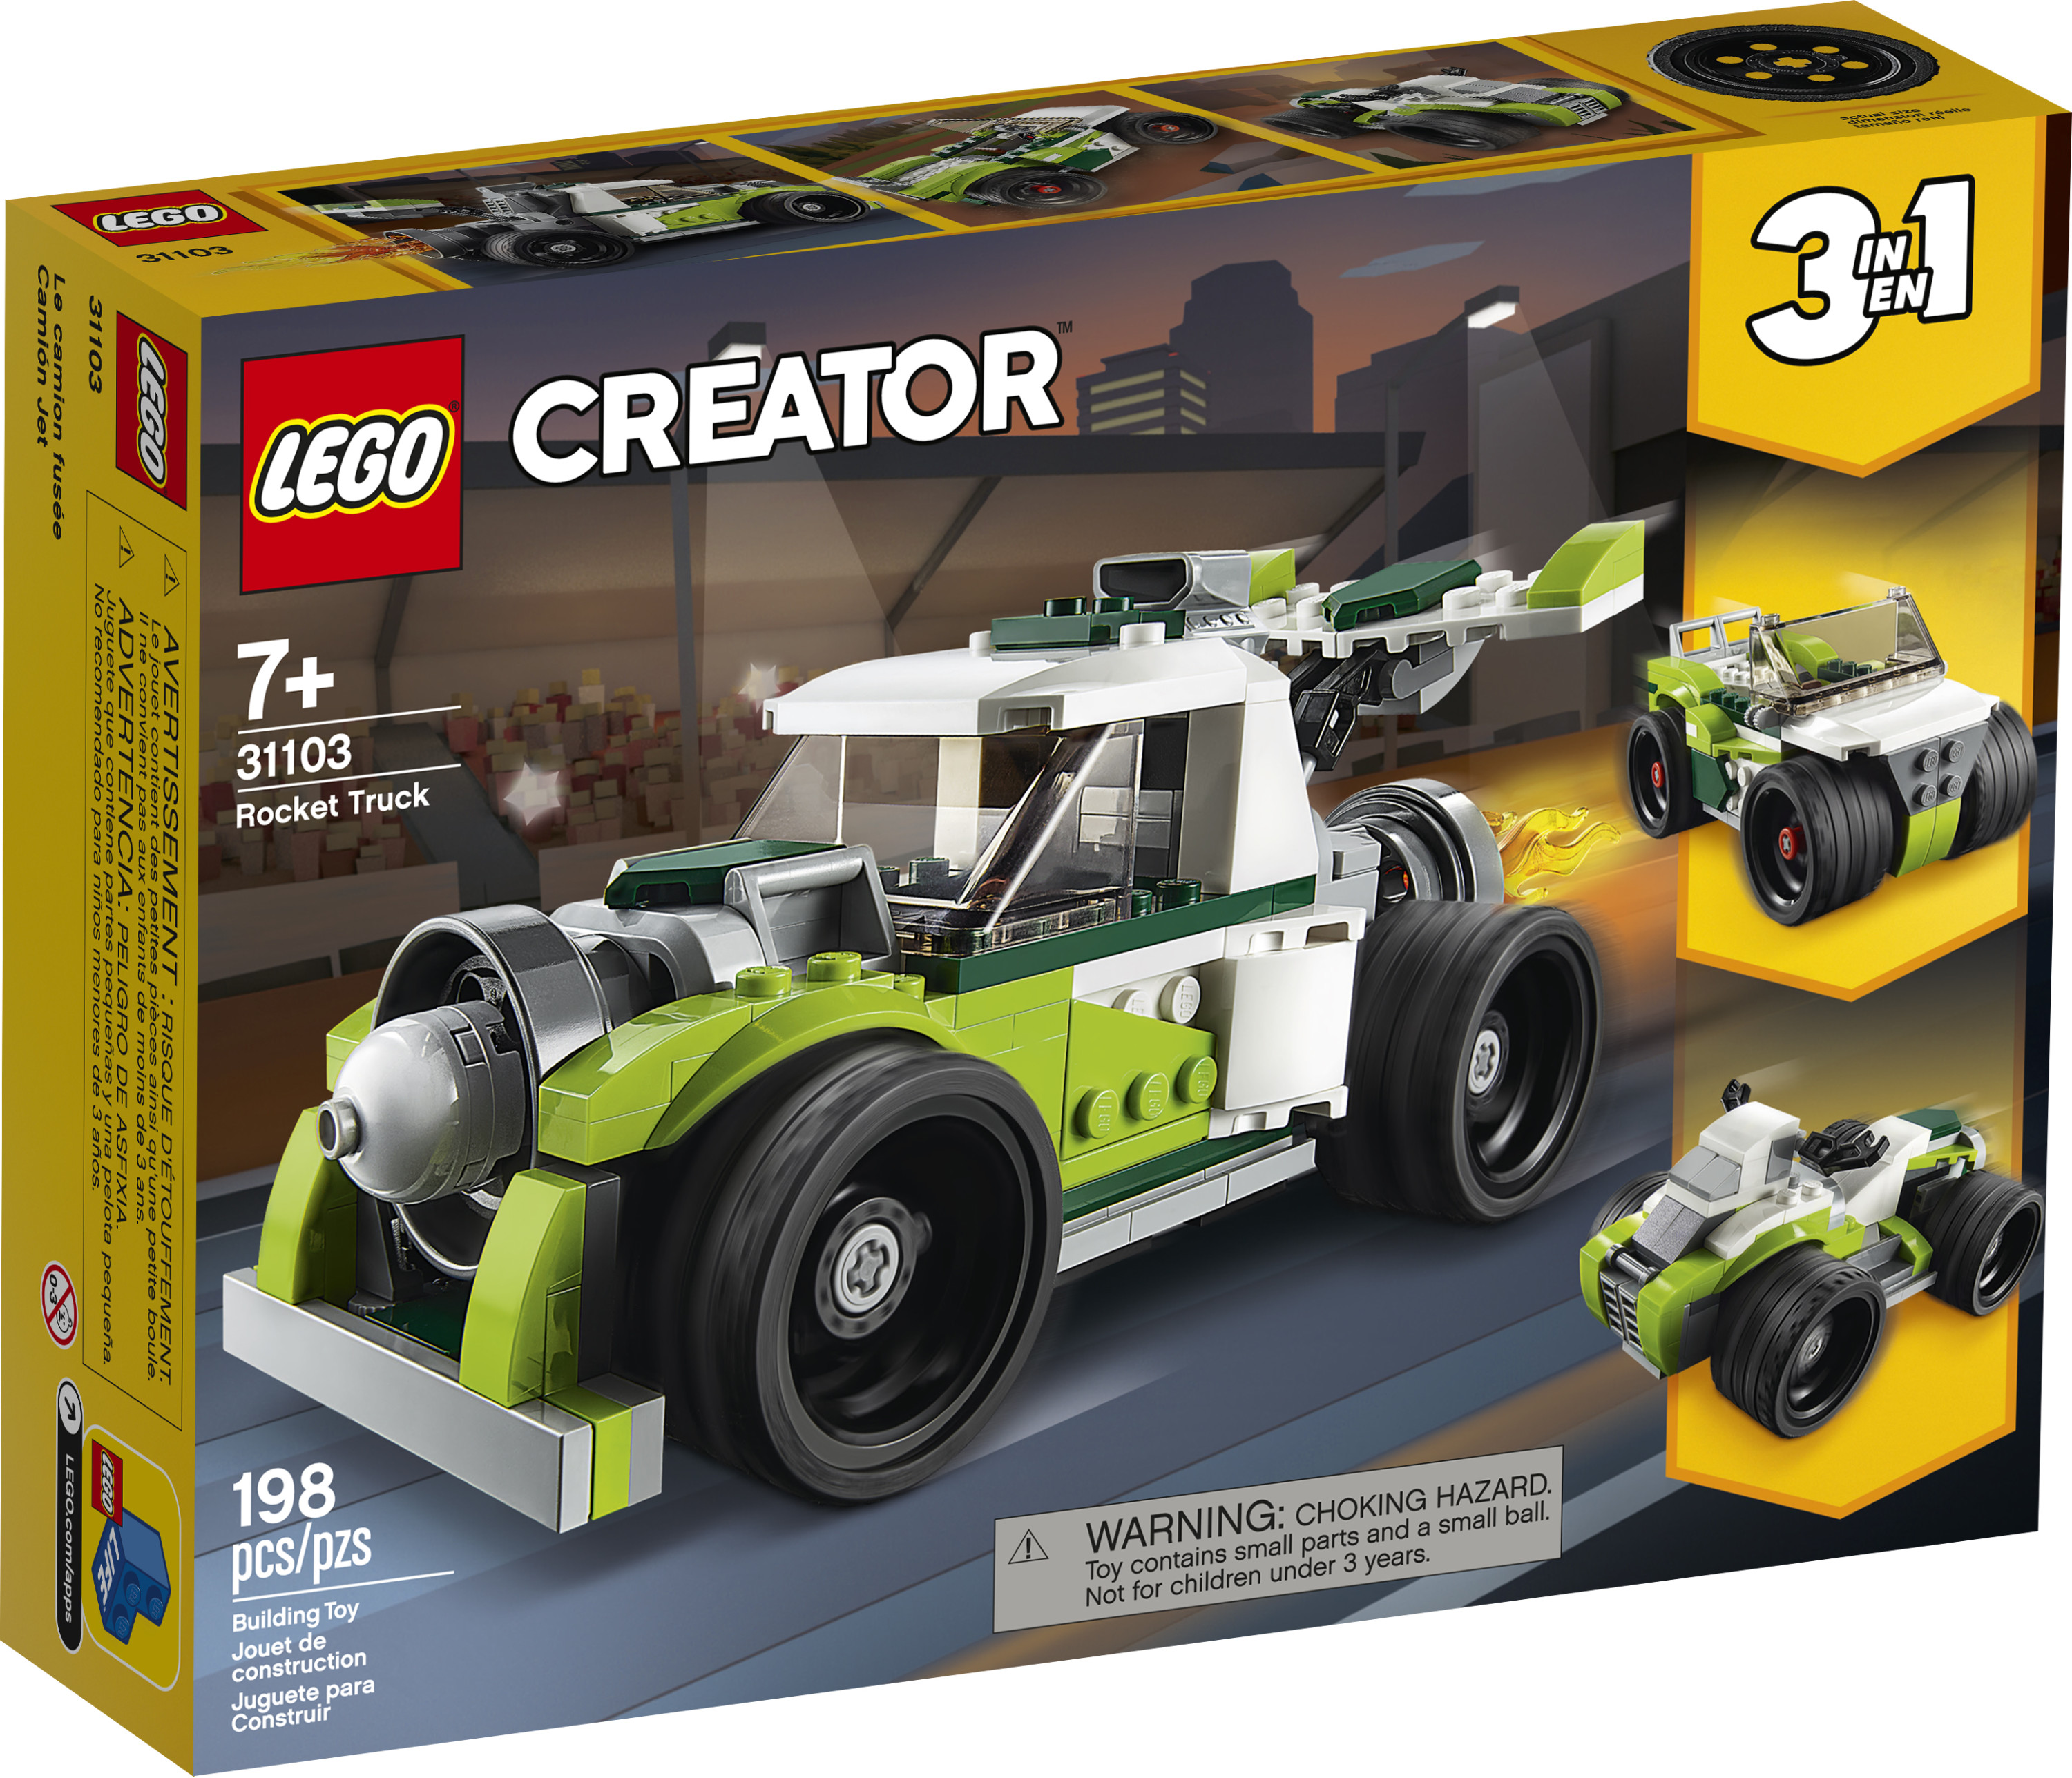 LEGO Creator 3in1 Rocket Truck 31103 Action Building Toy for Kids, Build a Rocket Truck, Off-Roader or Quad Bike (198 Pieces) - image 4 of 6